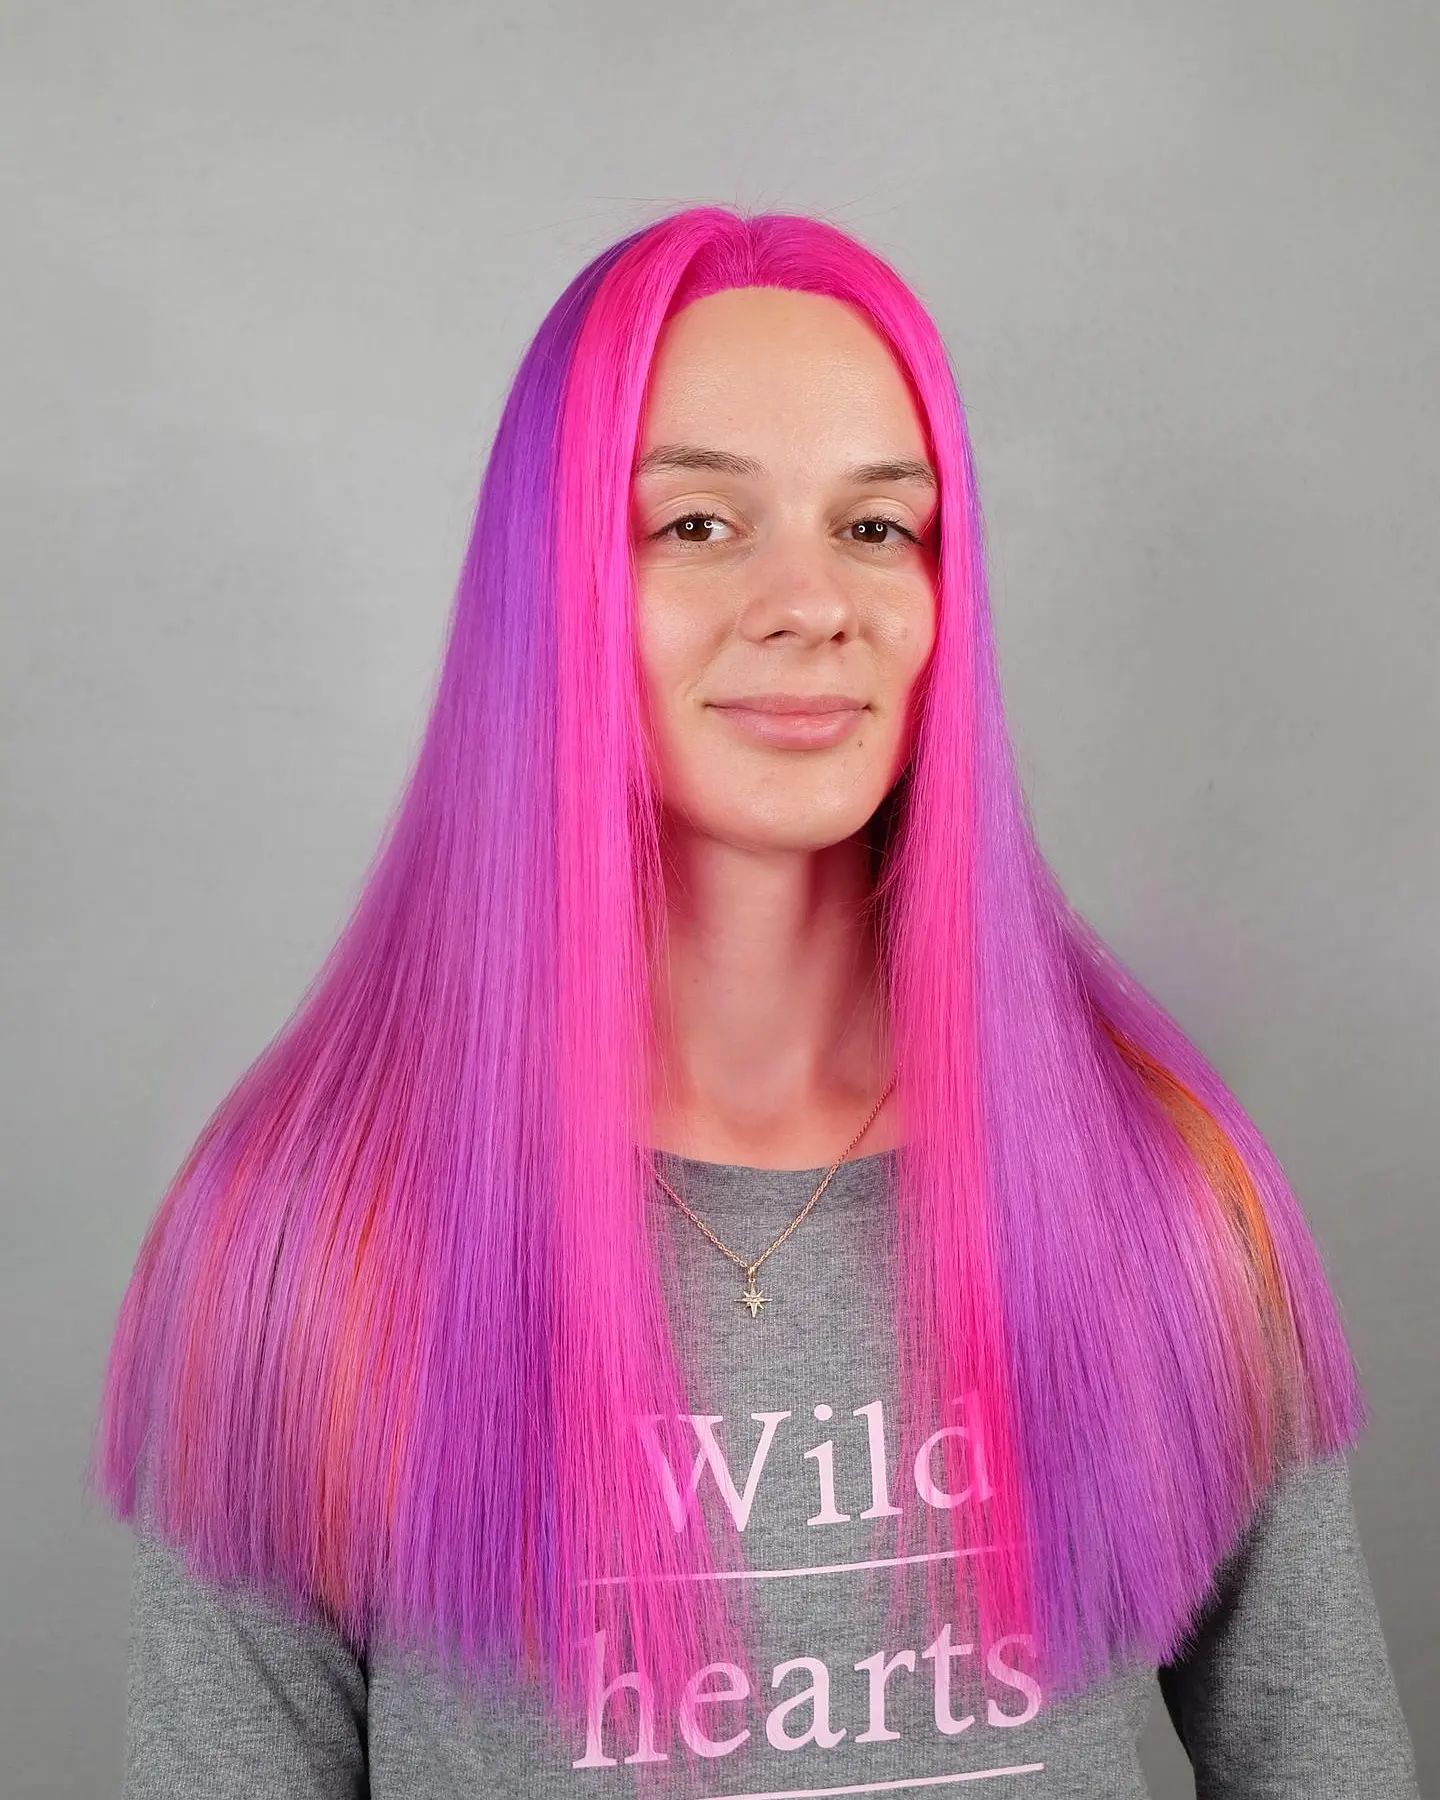 girls with pink and purple hair